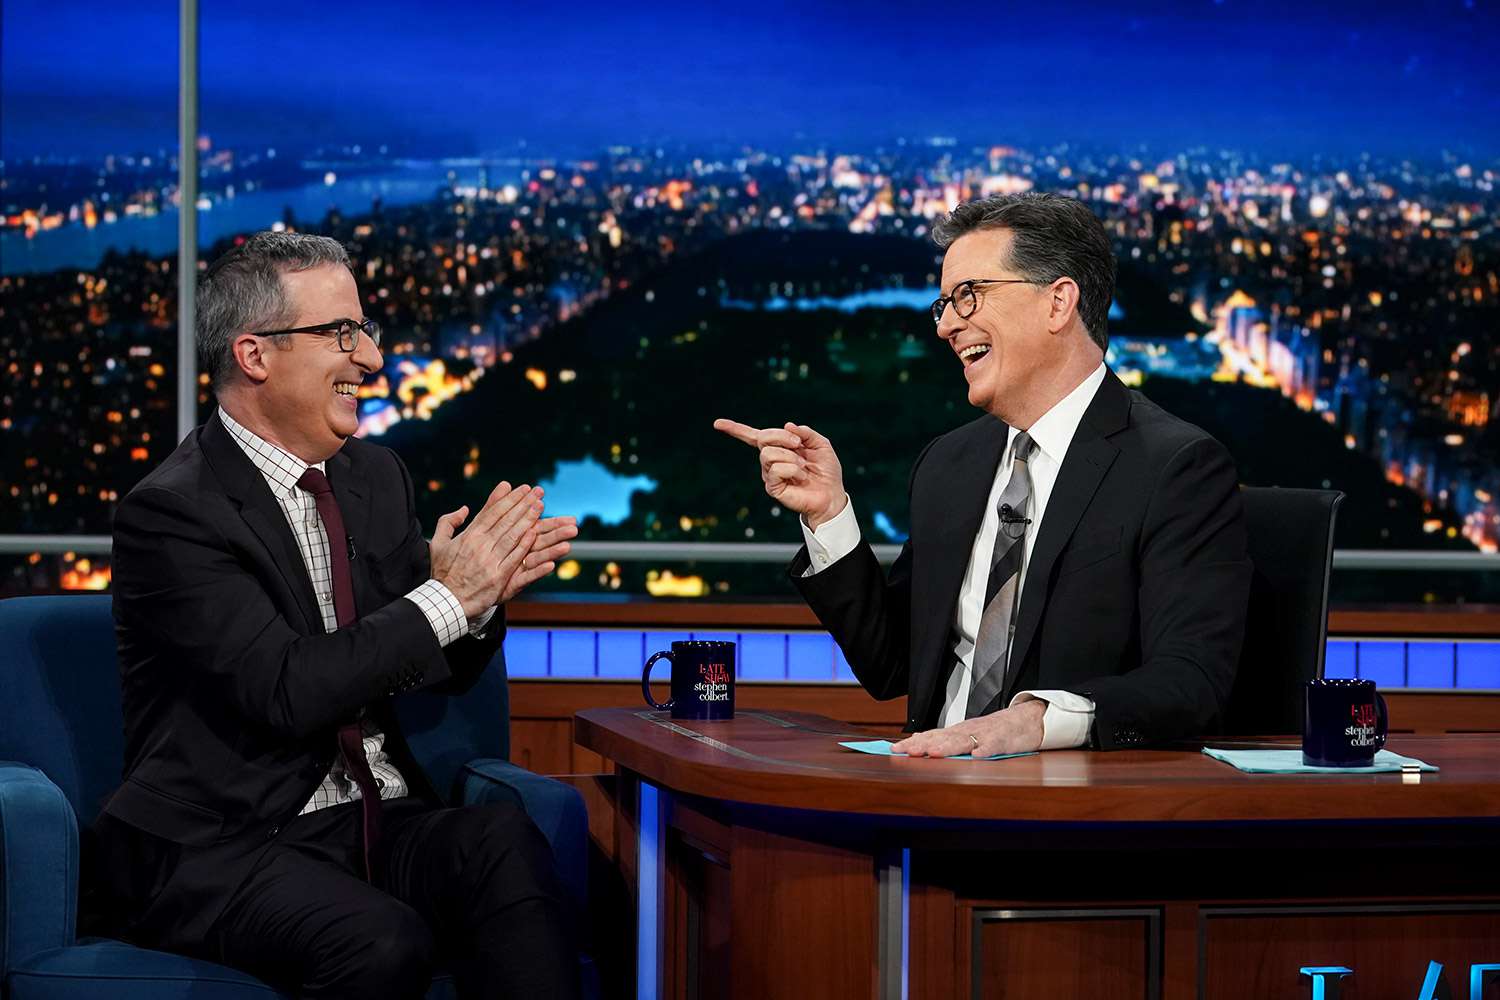 Late-Night Super Group! Find Out Why Colbert, Meyers, Oliver and Both Jimmys Are Teaming Up